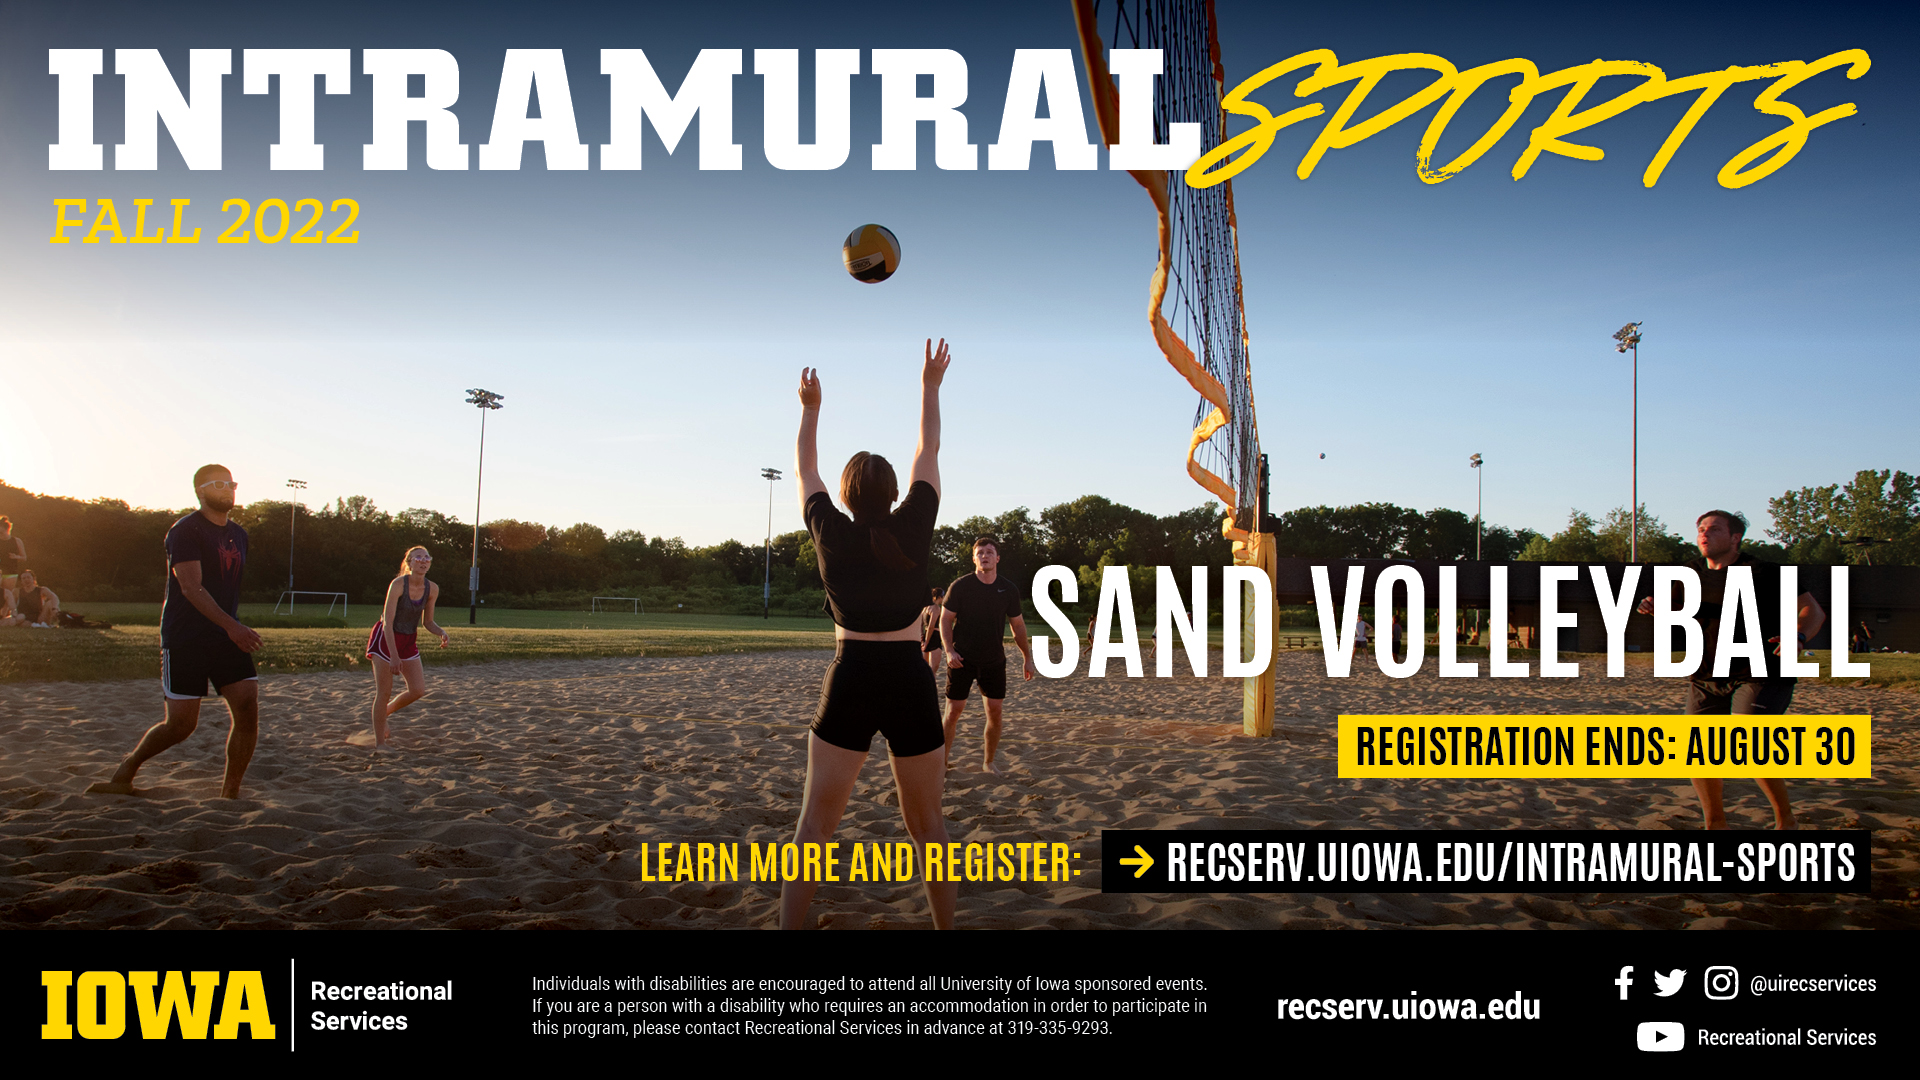 Intramural Sports Fall 2022: Sand Volleyball. Learn more and register at reserv.uiowa.edu/intramural-sports